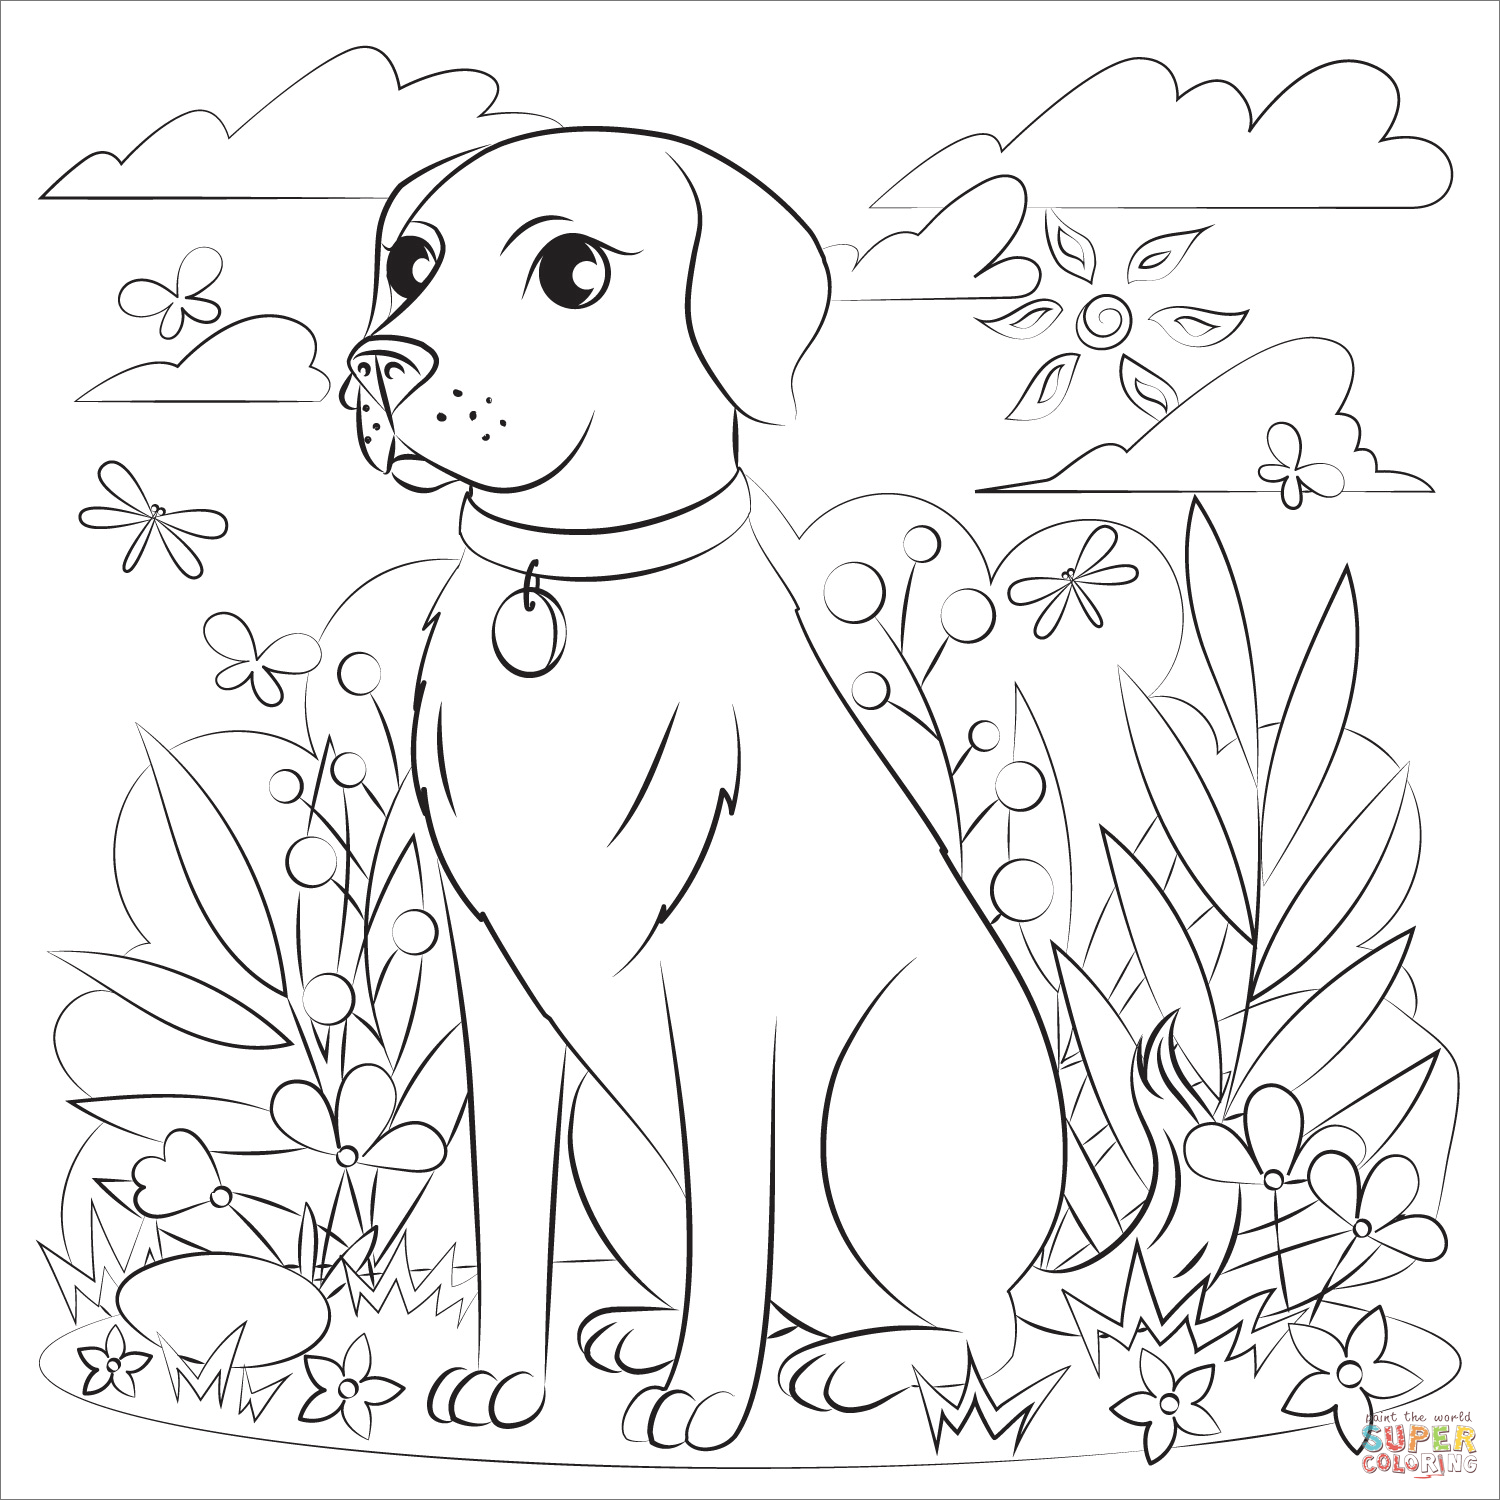 Black lab coloring page free printable coloring pages